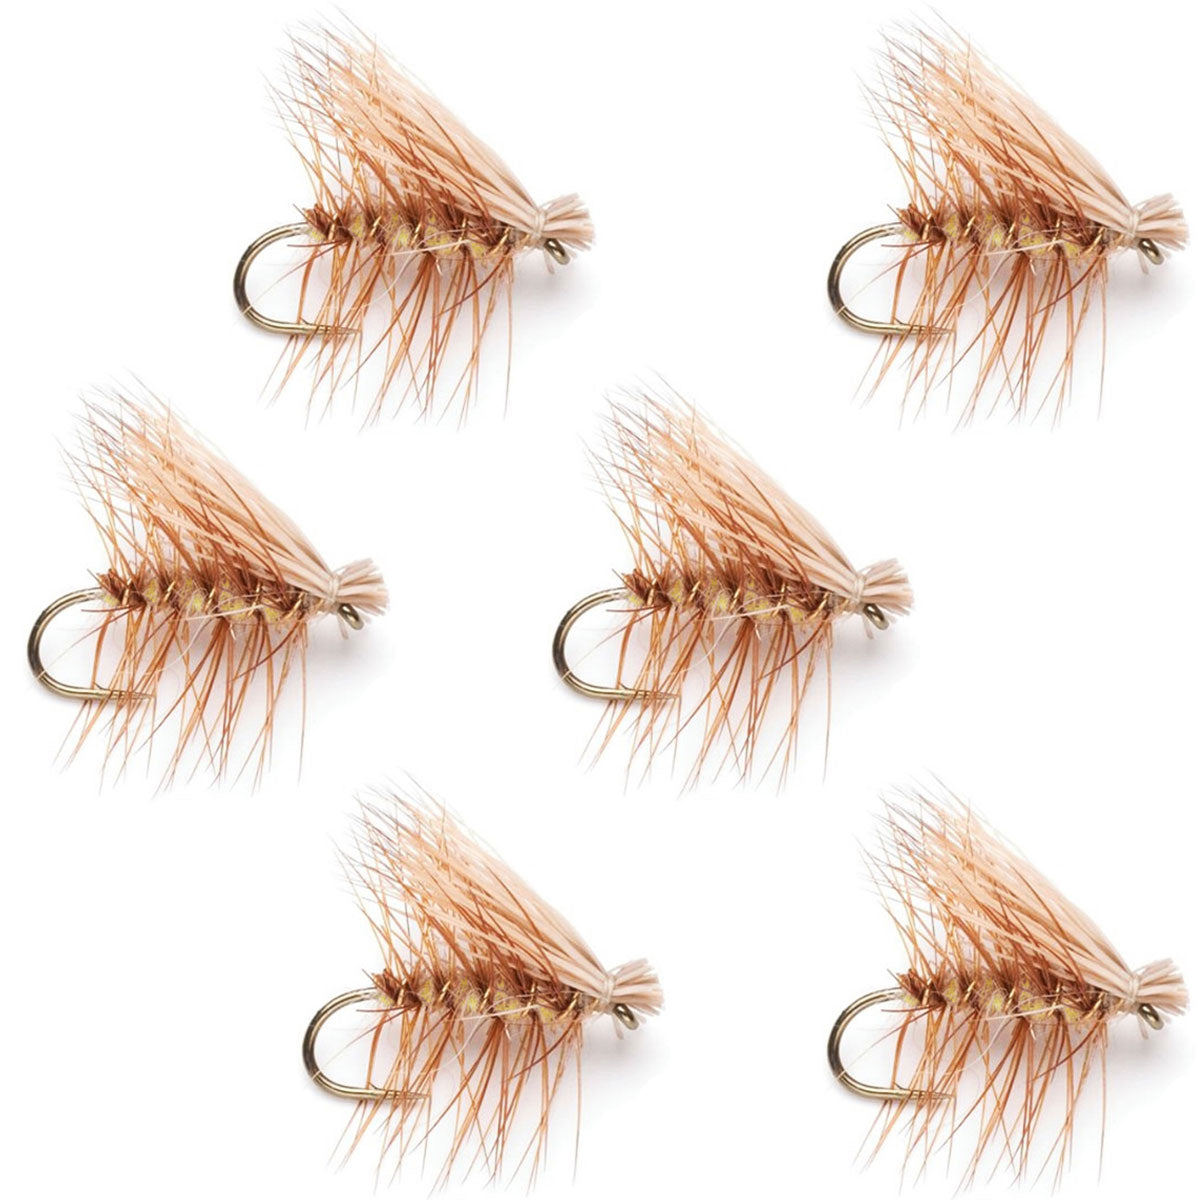 Yellow Elk Hair Caddis Classic Trout Dry Fly - Set of 6 Flies Size 16